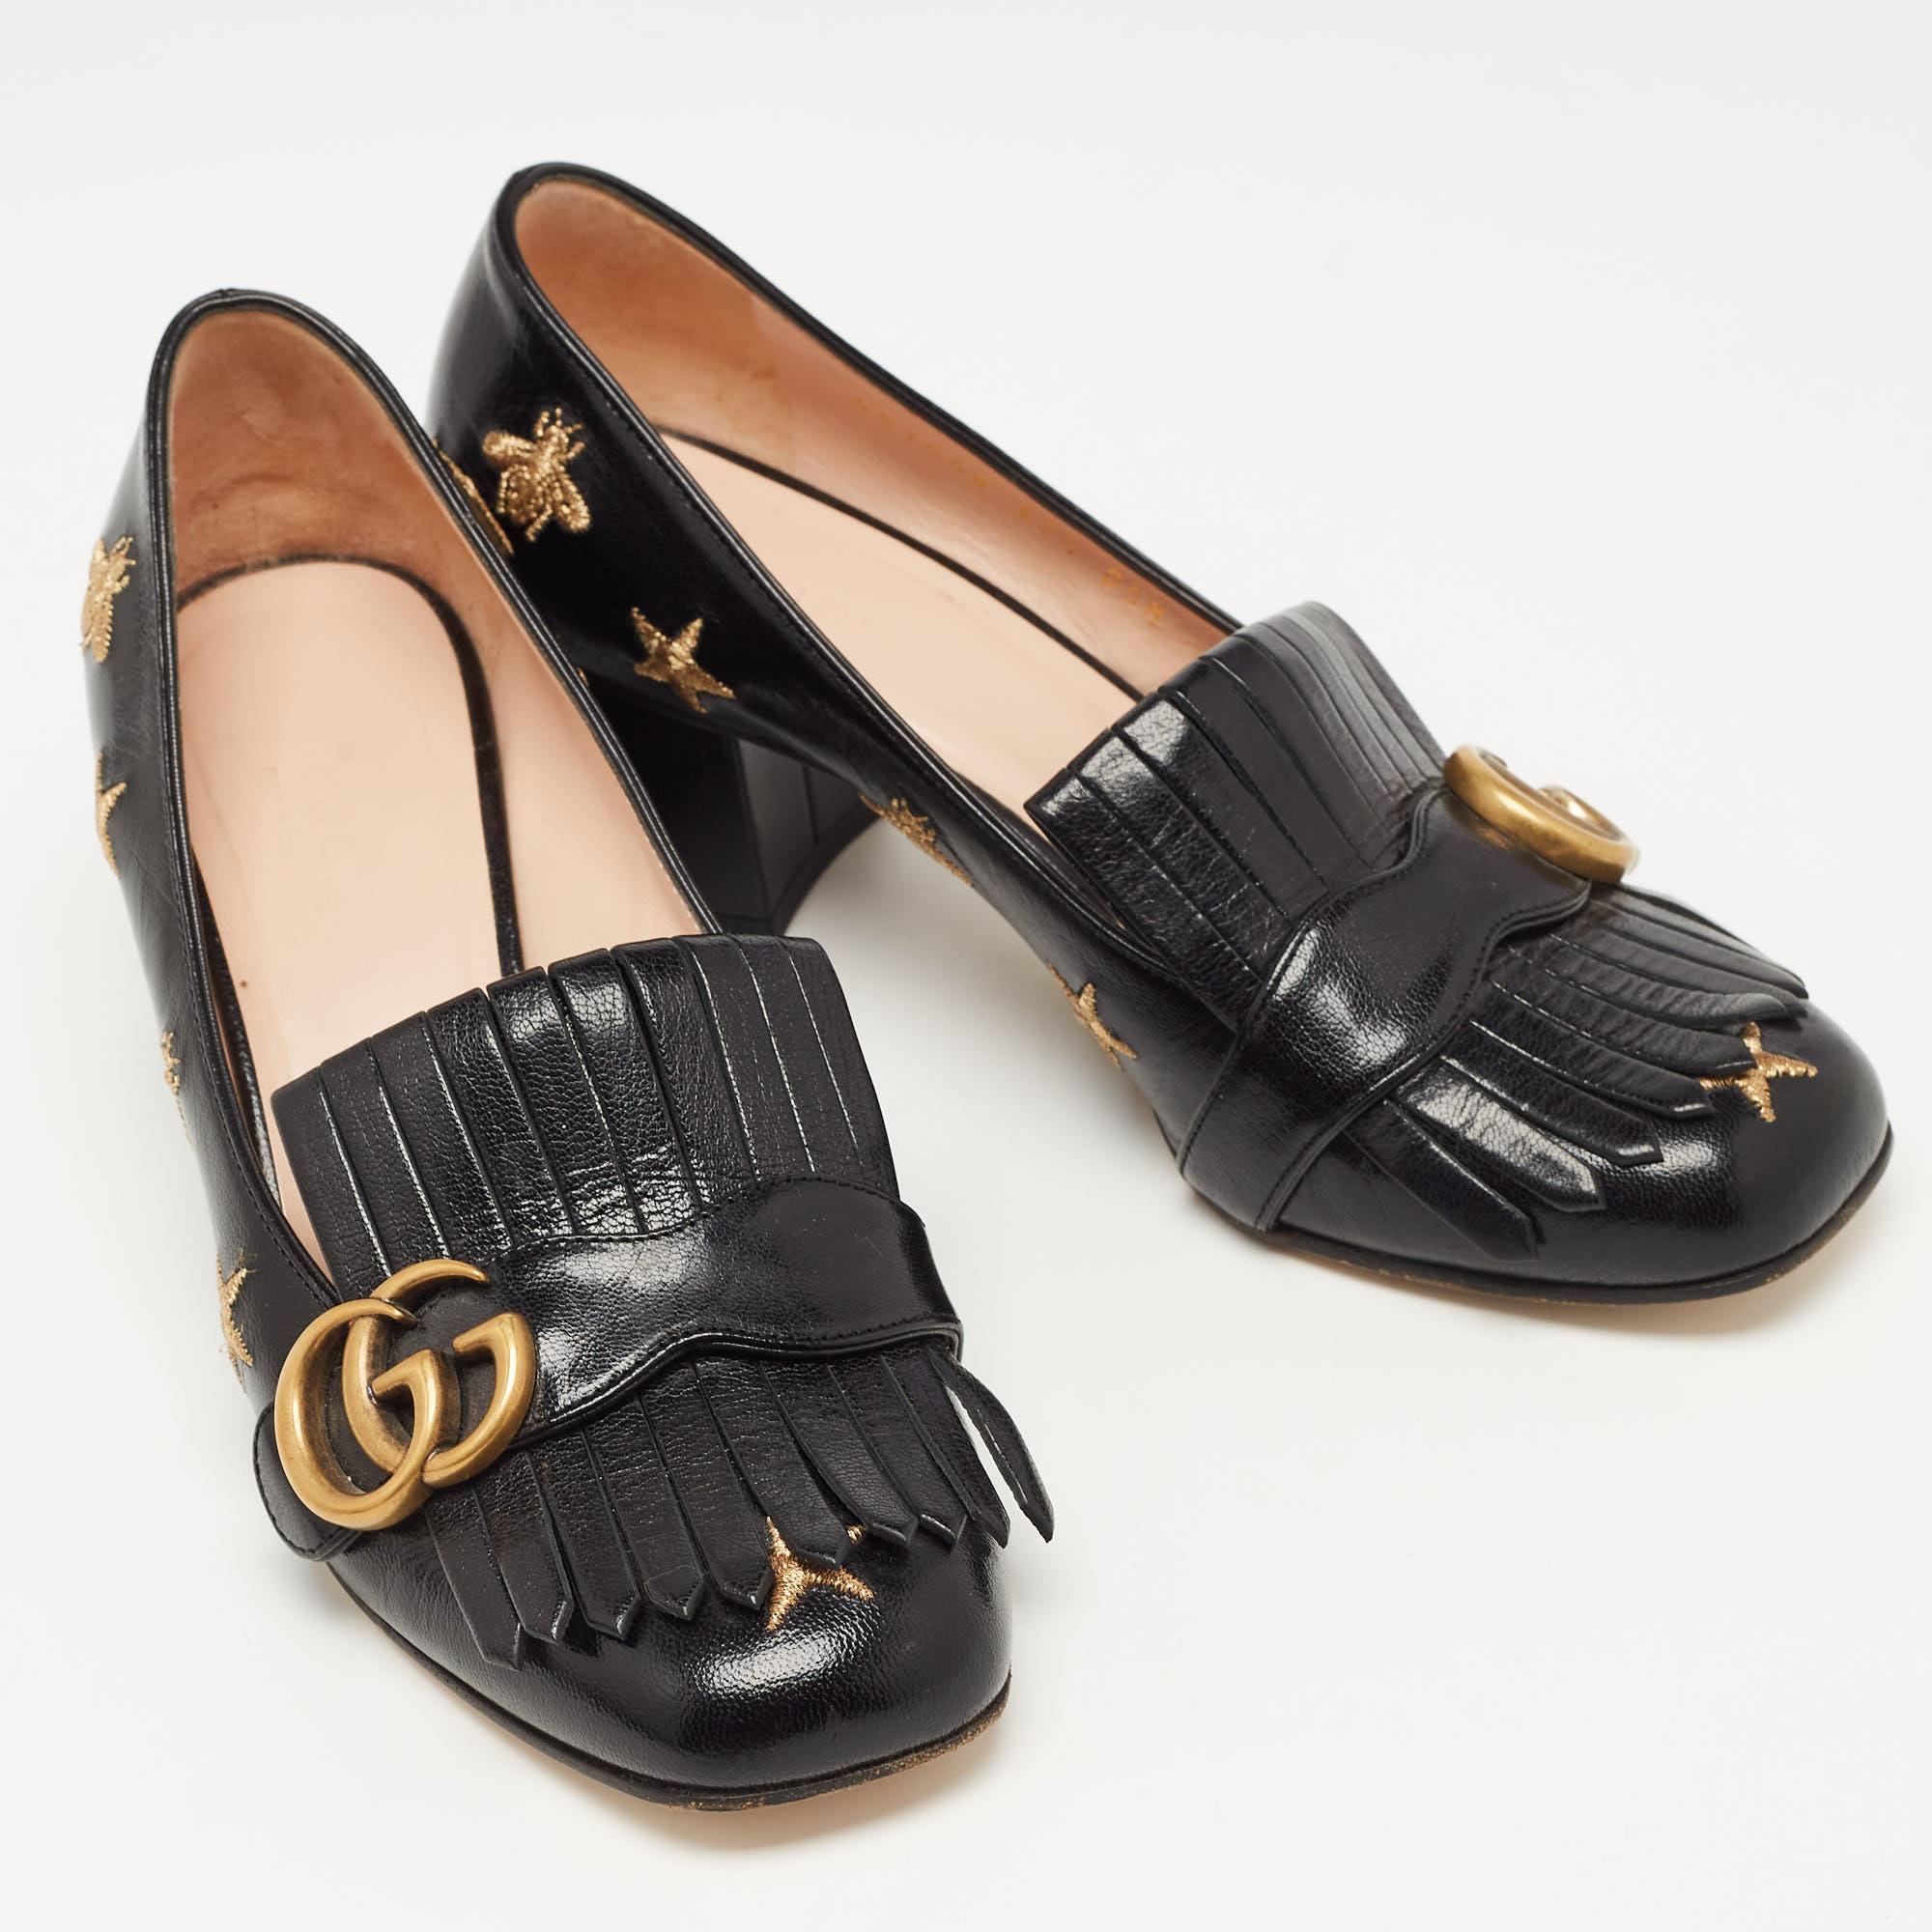 Gucci Black Embroidered Leather GG Marmont Fringe Pumps Size 37.5 3